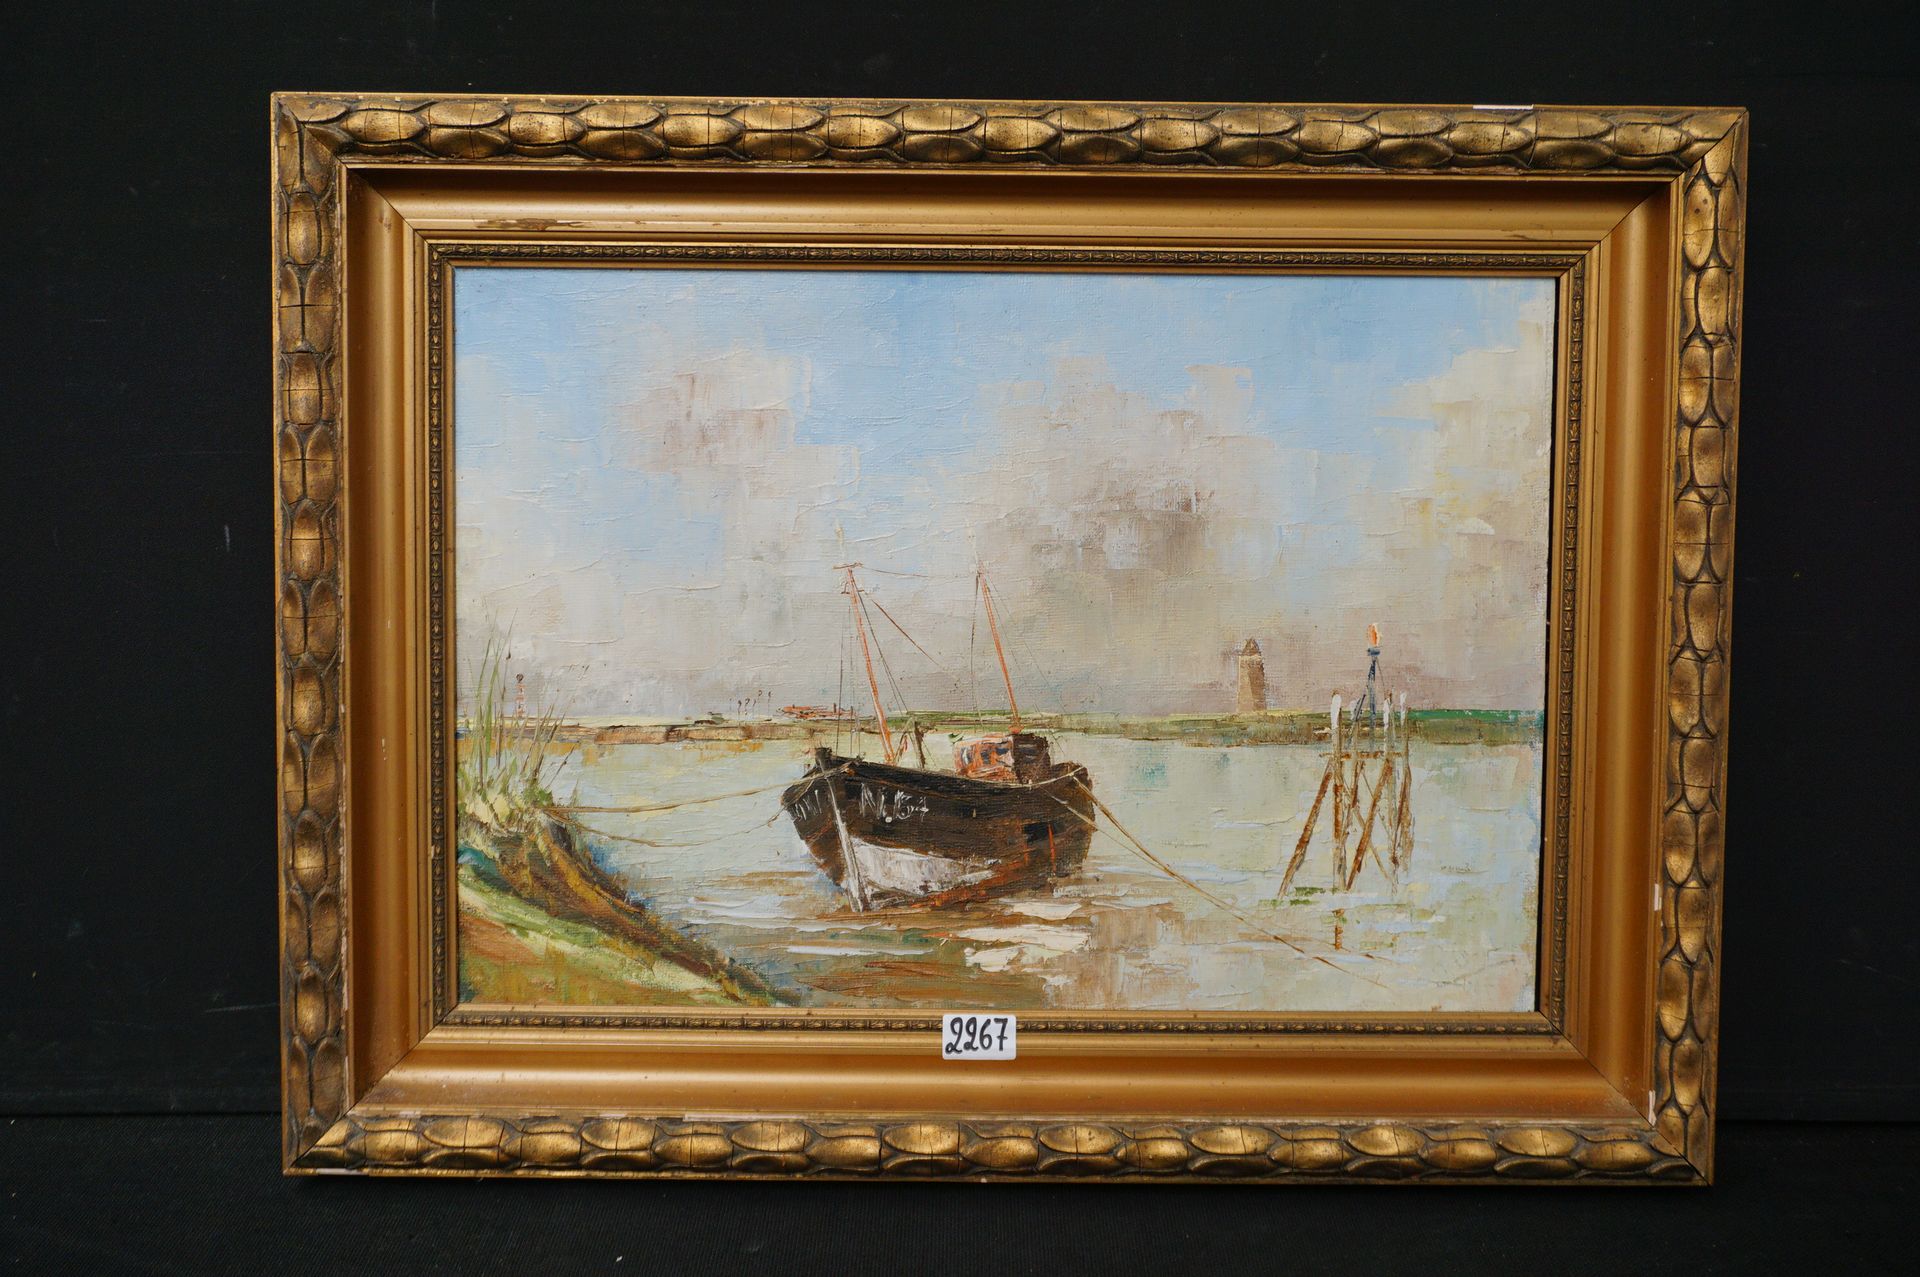 Null 
Painting - "Nieuwpoort fishing boat" - Oil on panel - 42 x 60 cm